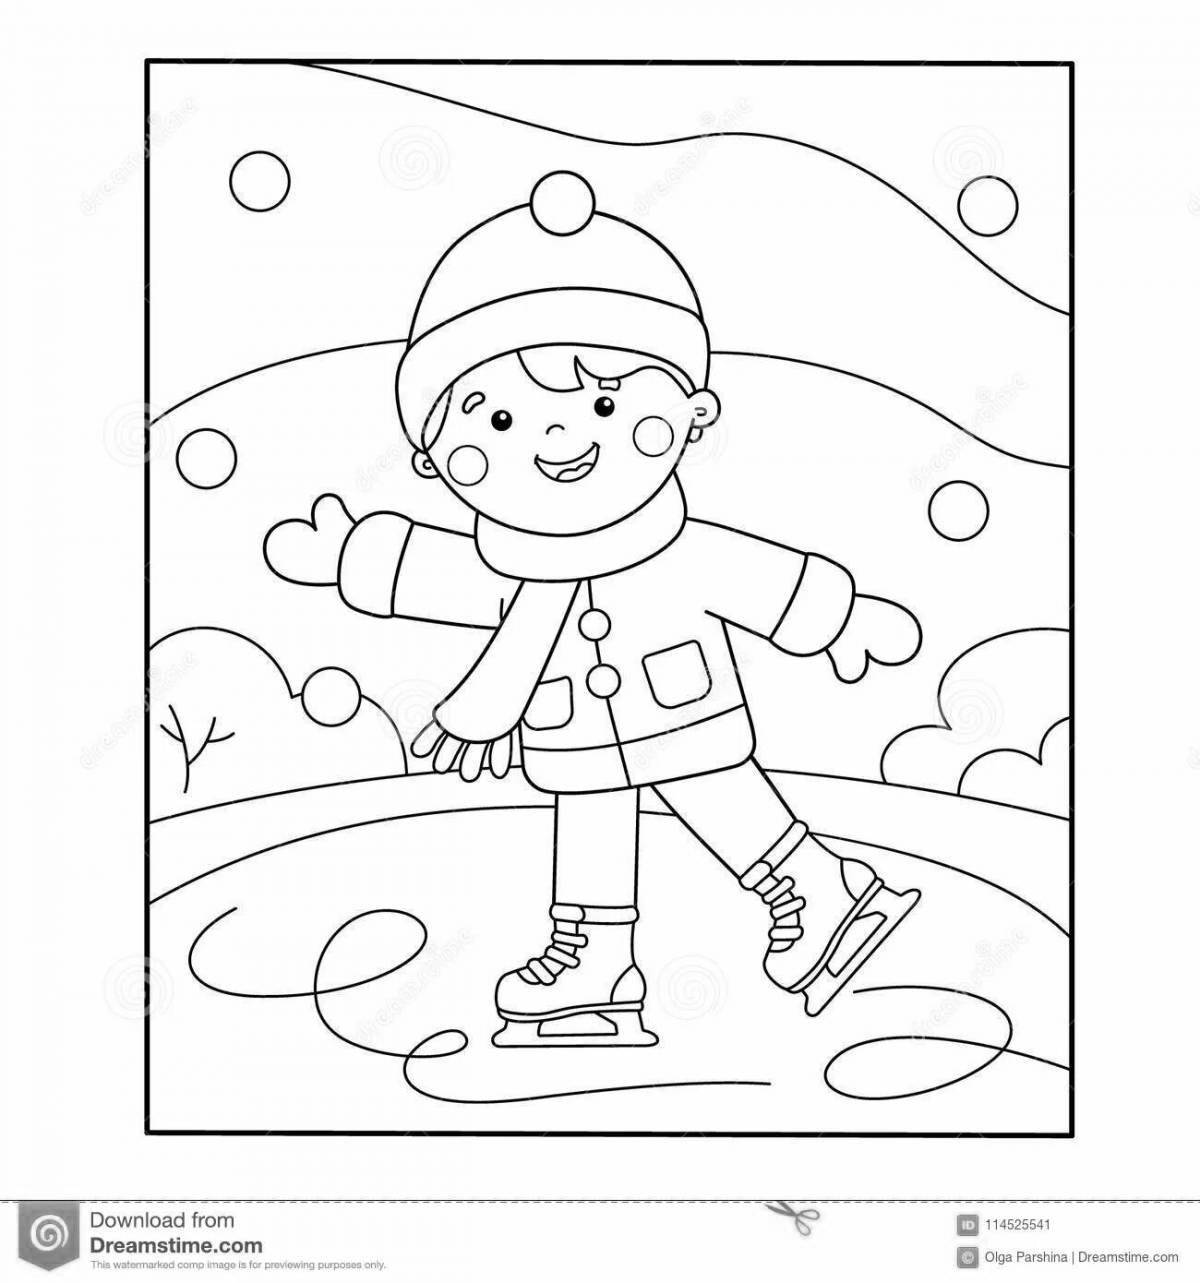 Dynamic speed skating coloring page for kids